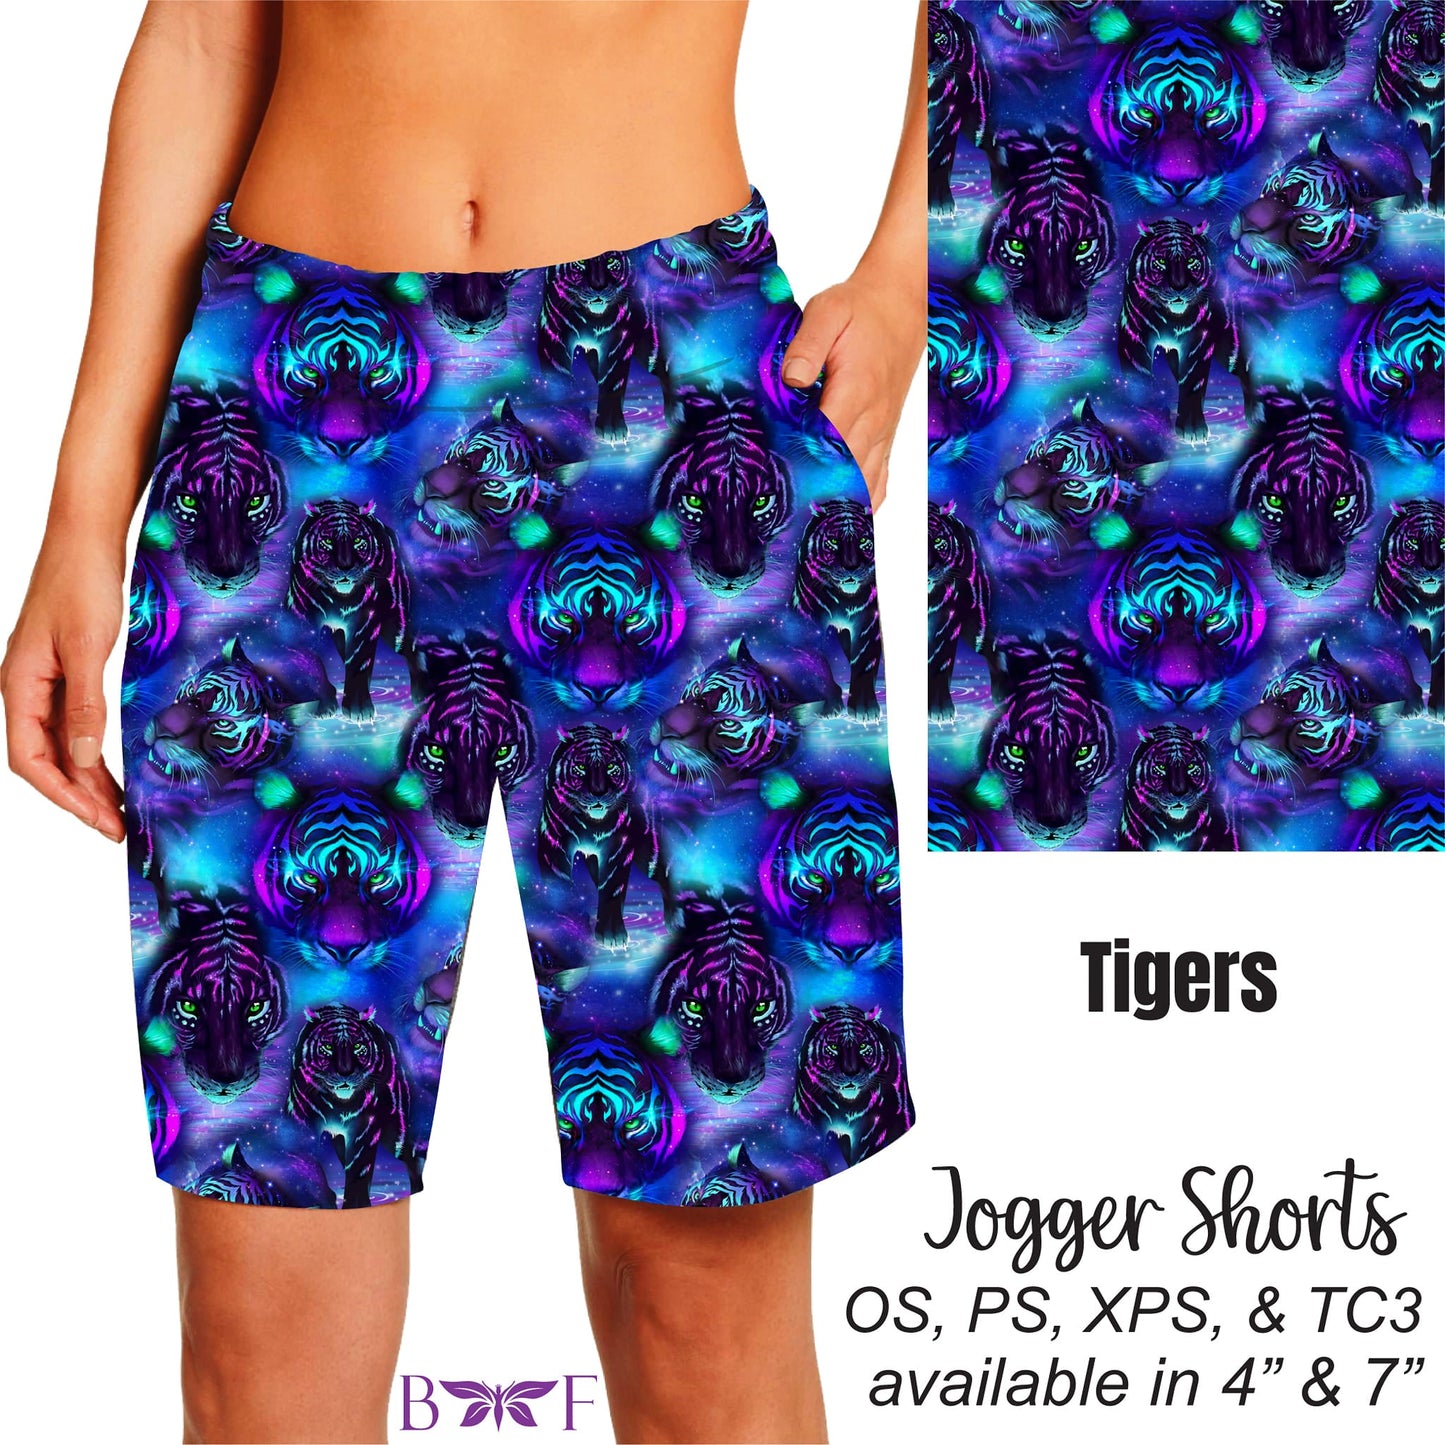 Tigers Leggings and Capris with pockets